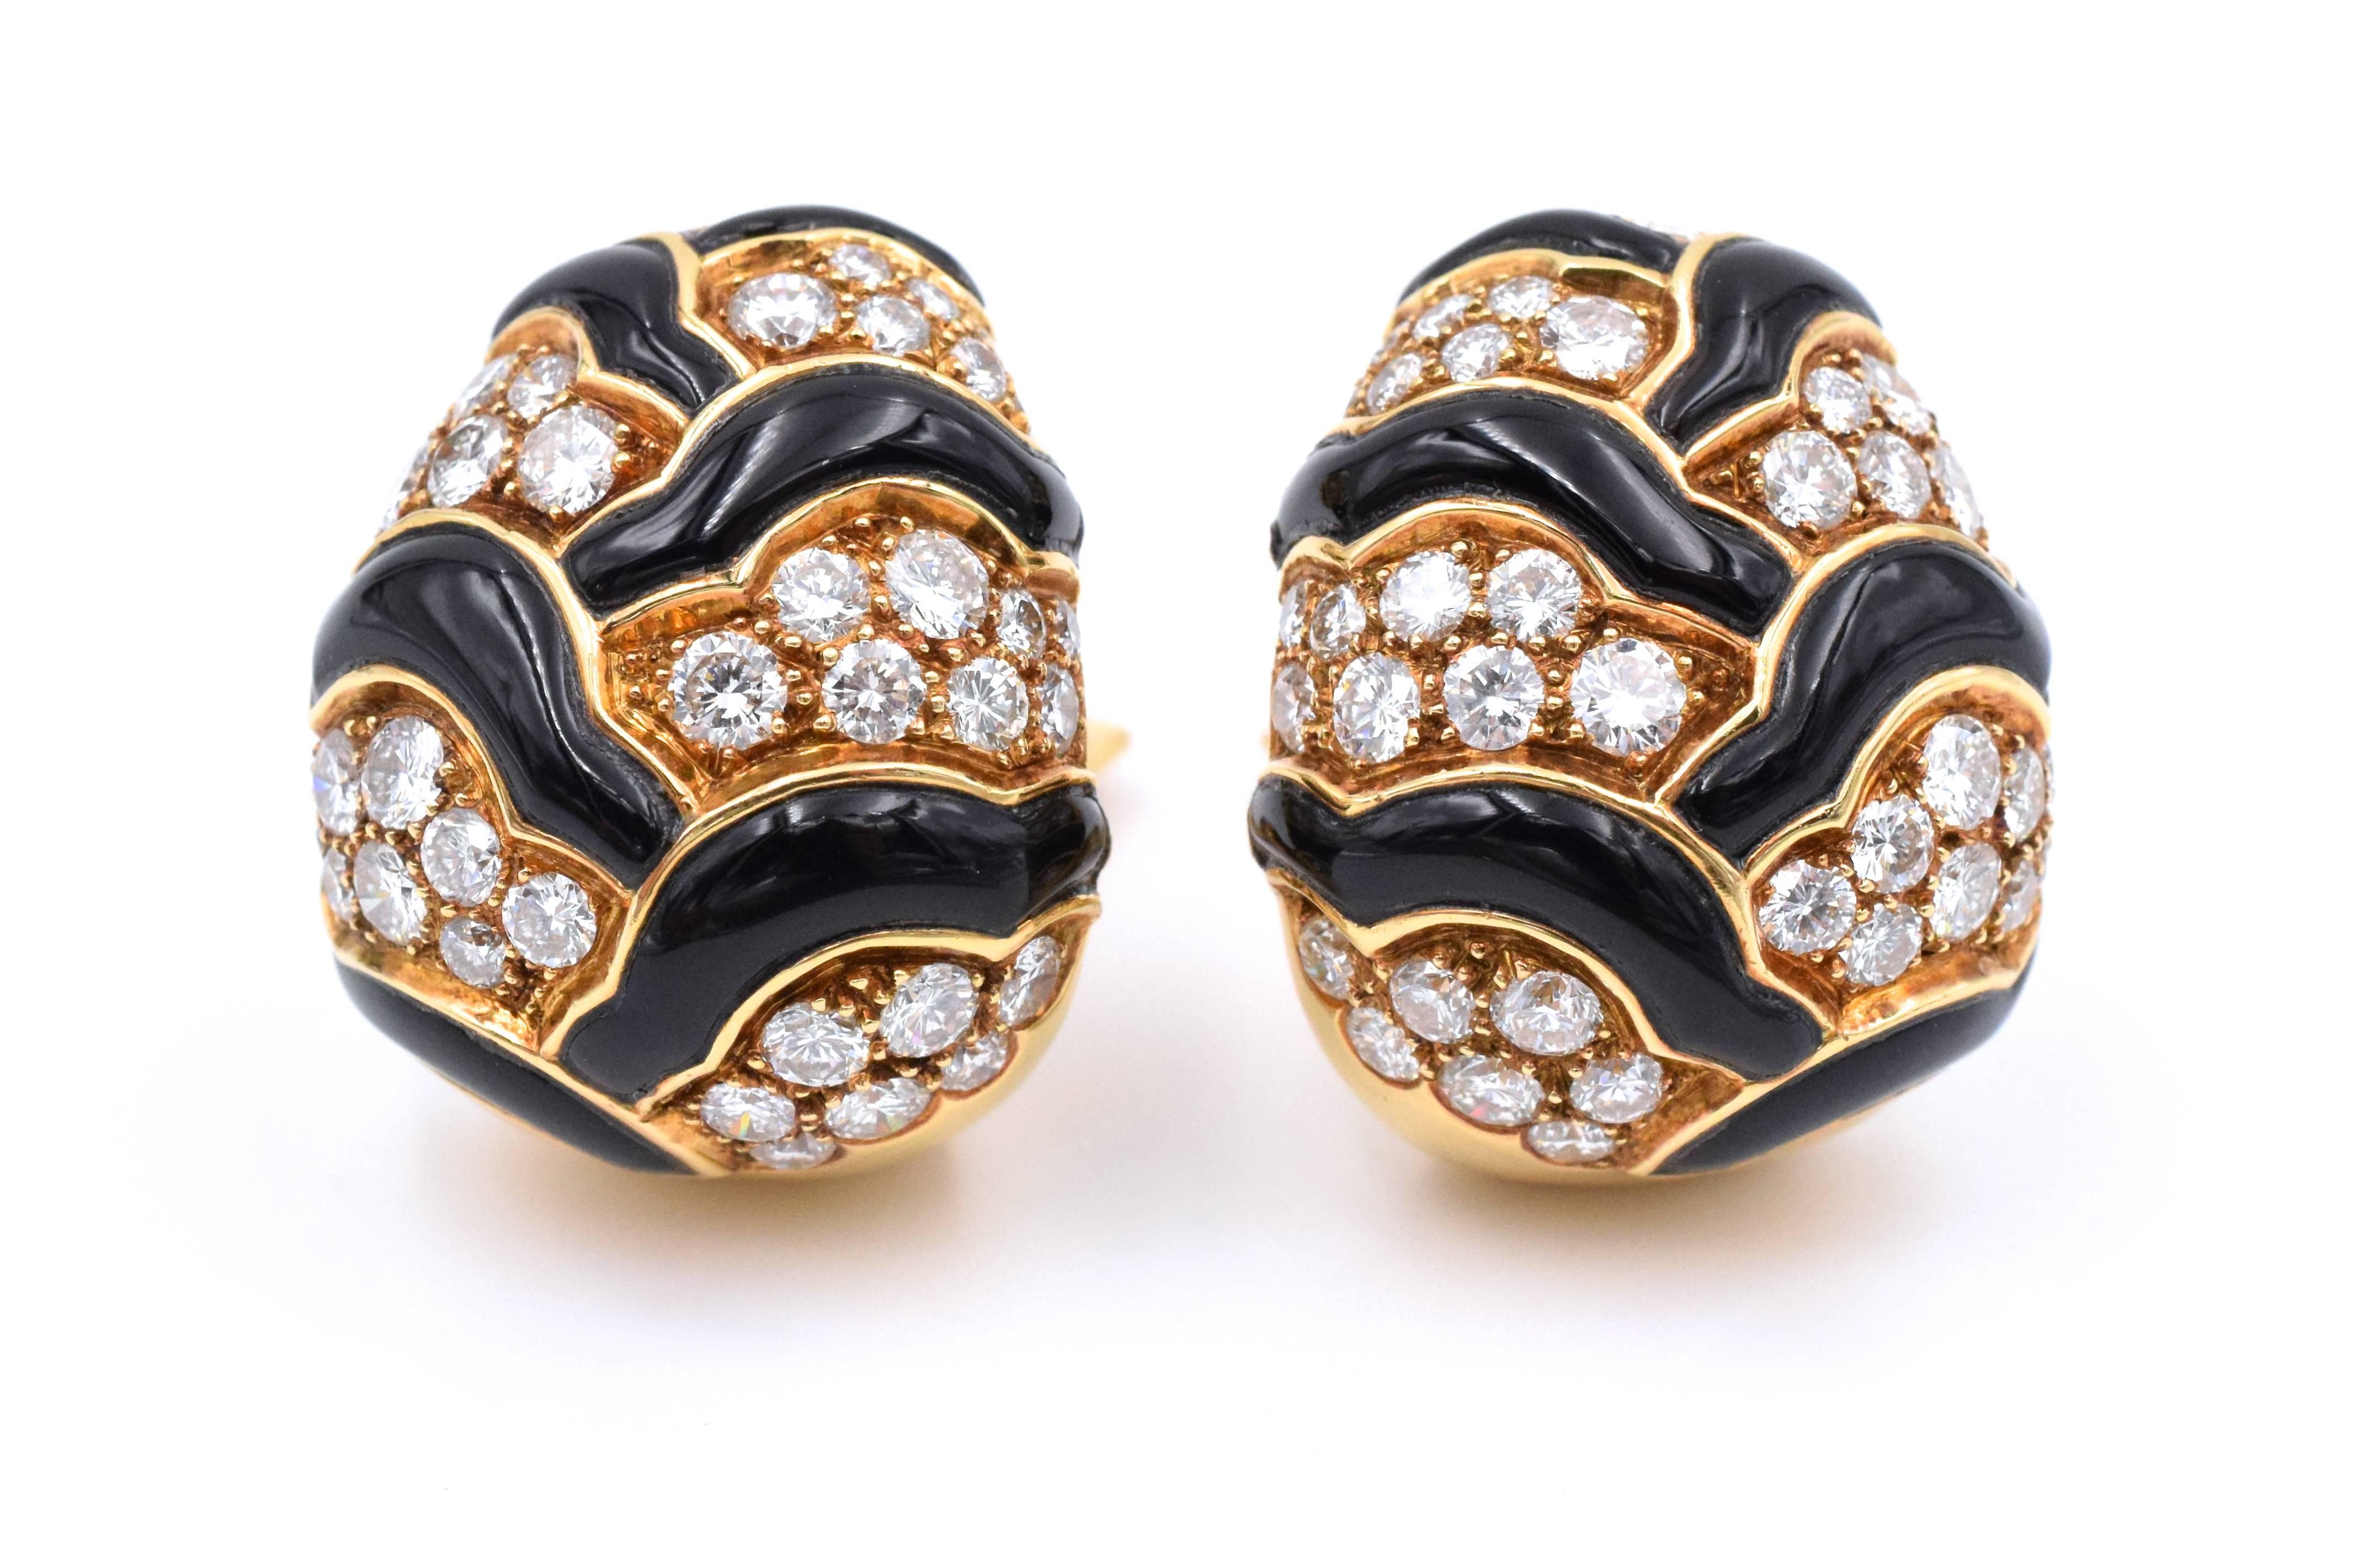 Onyx And Diamond Ear-clips By Van Cleef and Arpels. Set In 18 Karat Yellow Gold, Consisting Of Several Pave Set Sections Divided By Inset Carved Onyx Sections.

Ear-clips Contain 68 Round Brilliant Cut Diamonds Weighing Approximately 5.5 Carats.